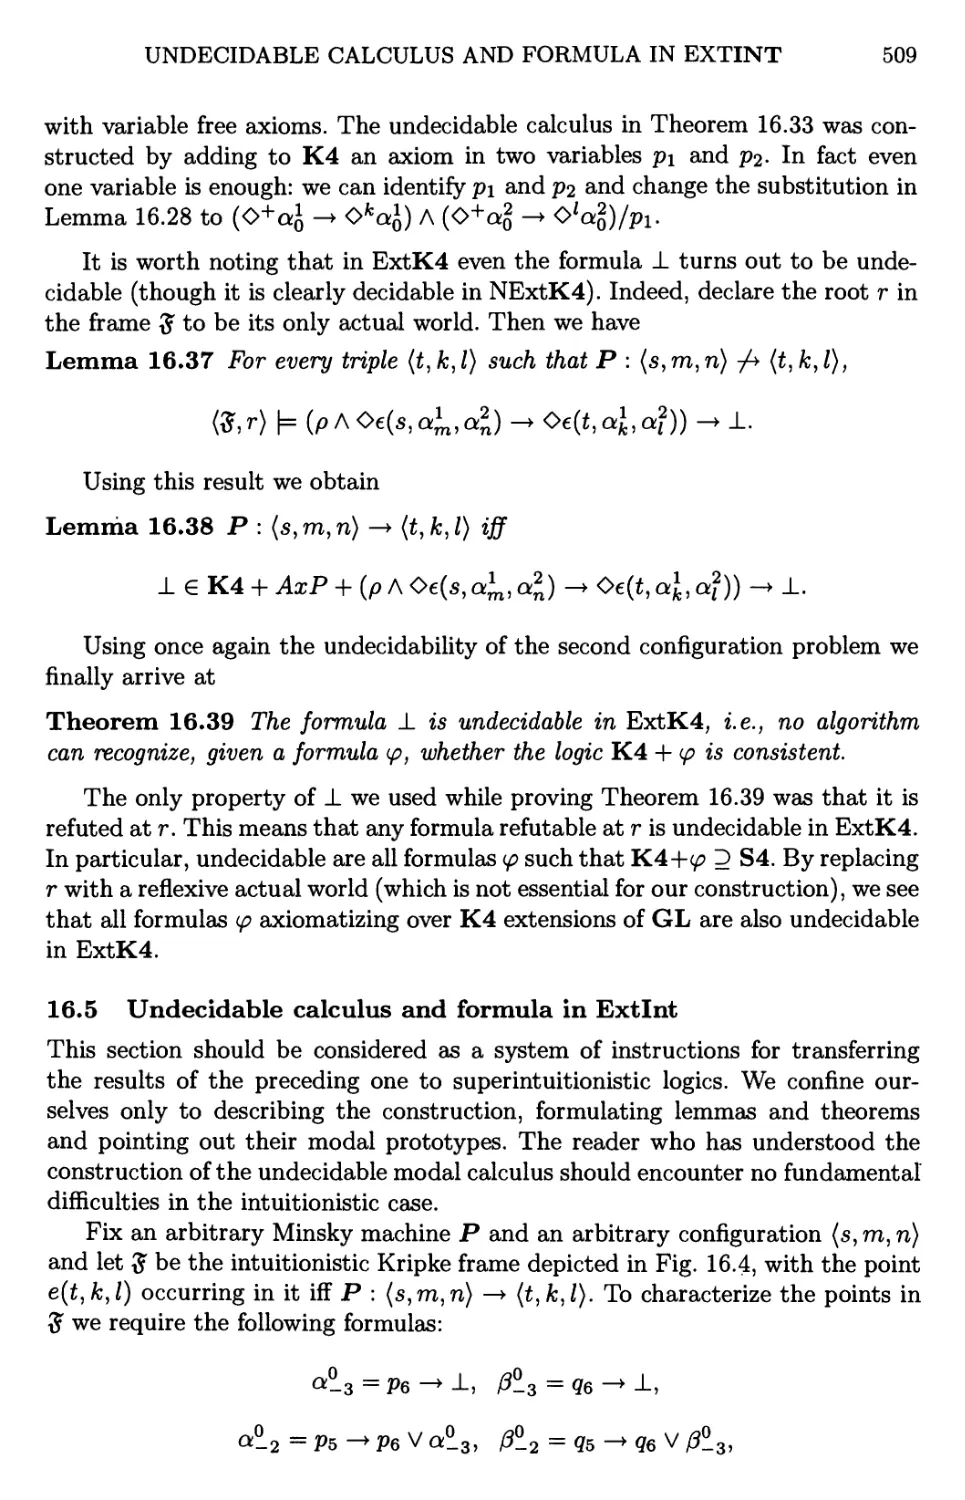 16.5 Undecidable calculus and formula in Extlnt